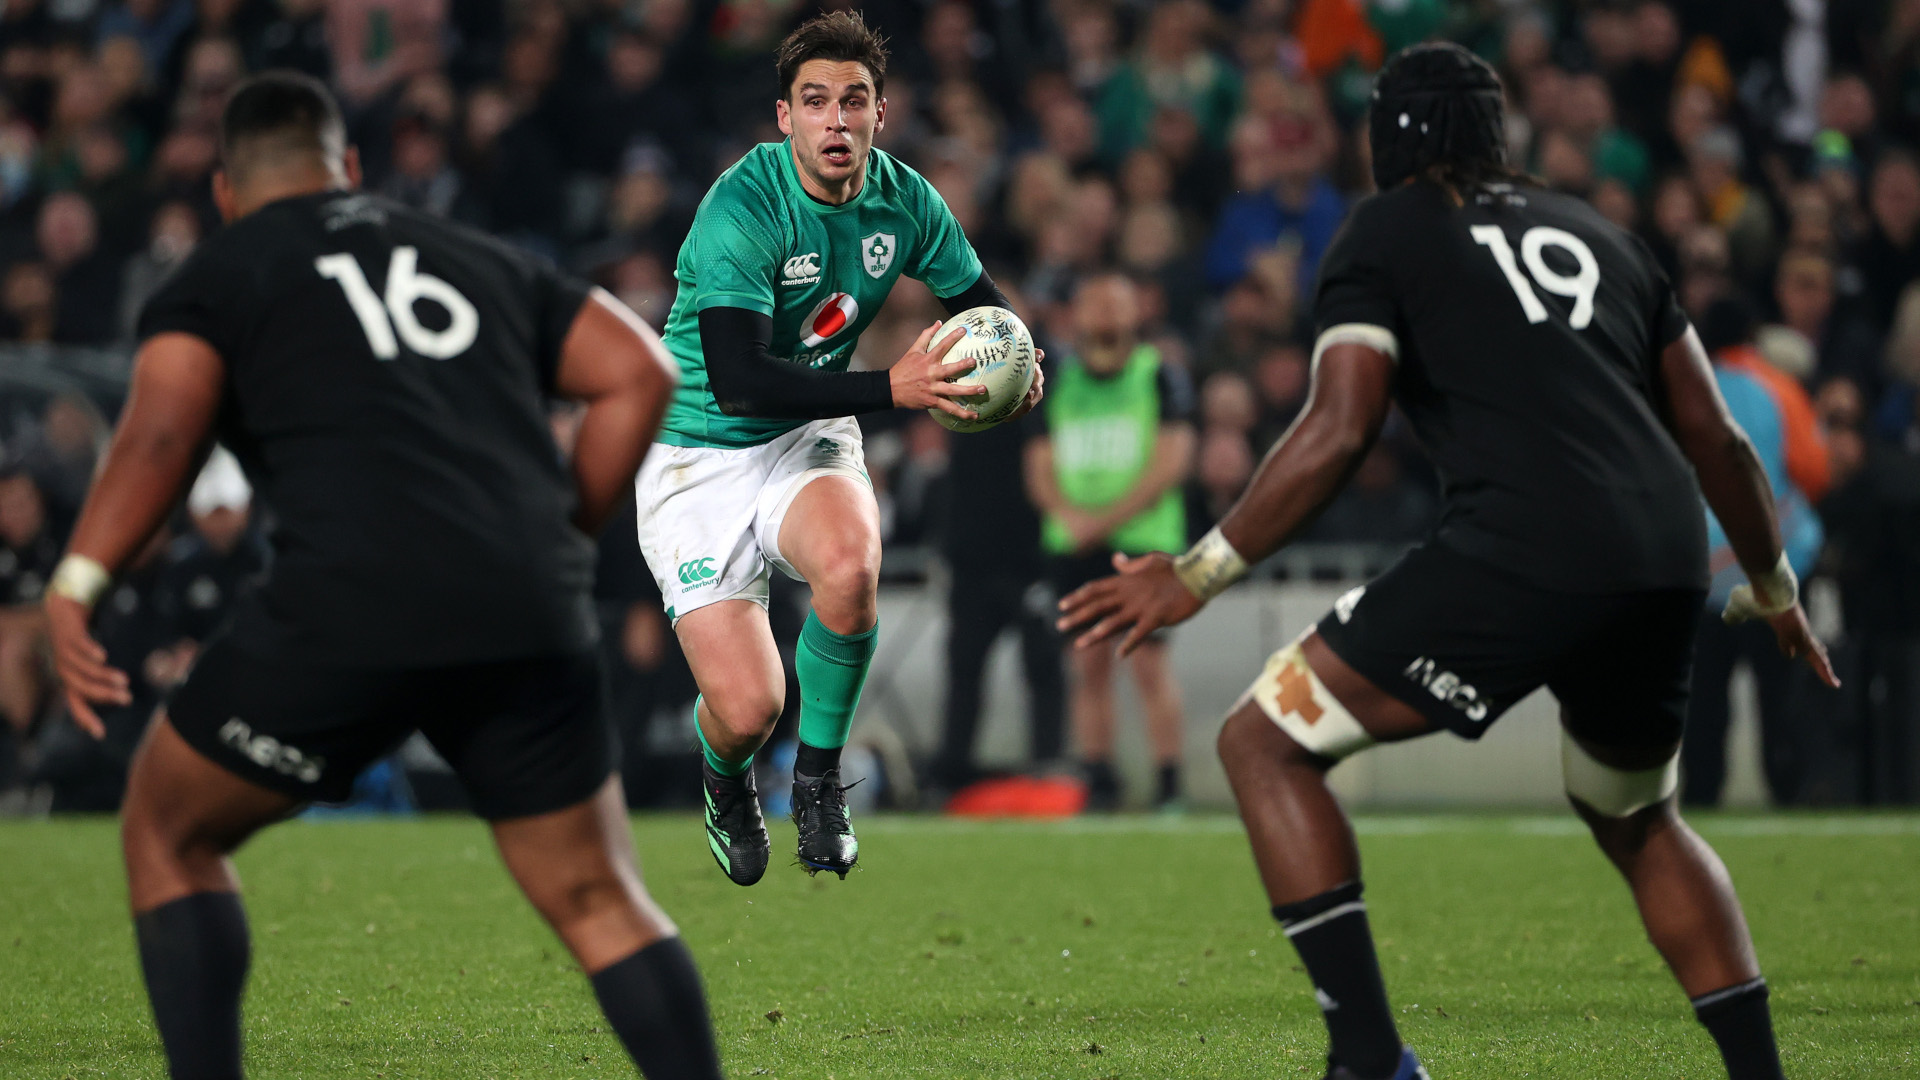 New Zealand vs Ireland live stream how to watch rugby second Test online from anywhere TechRadar